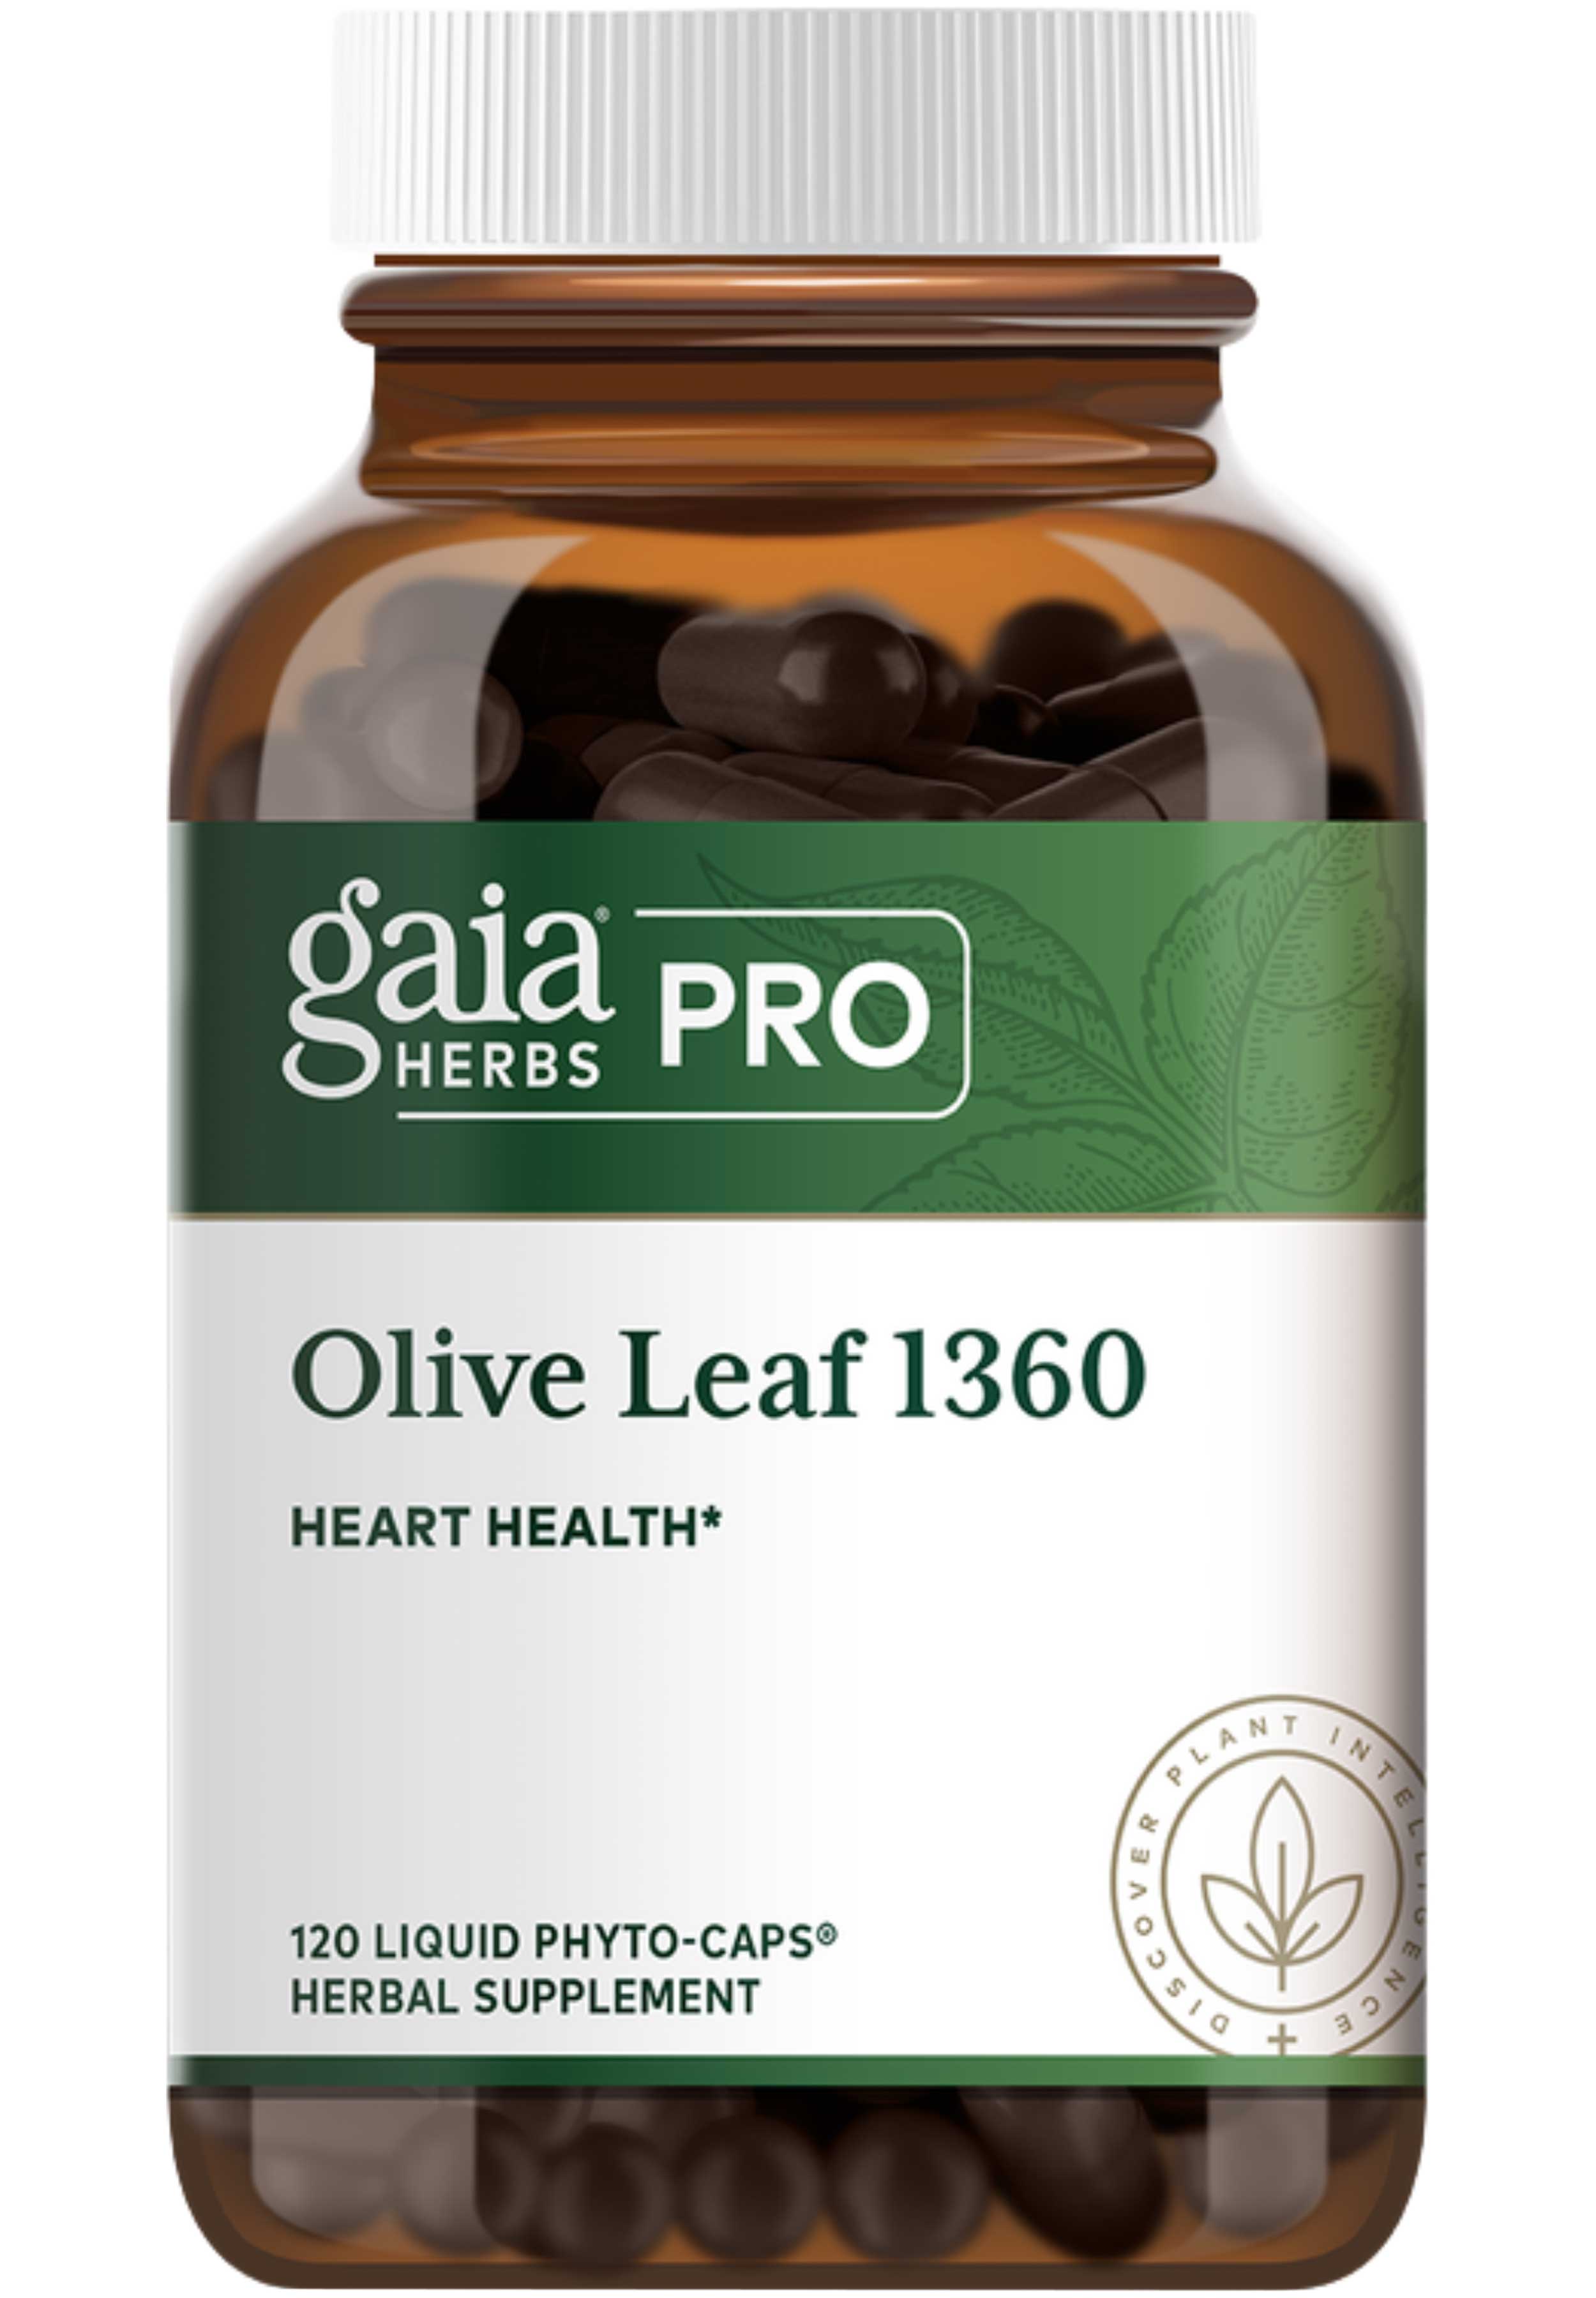 Gaia Herbs Professional Solutions Olive Leaf 1360